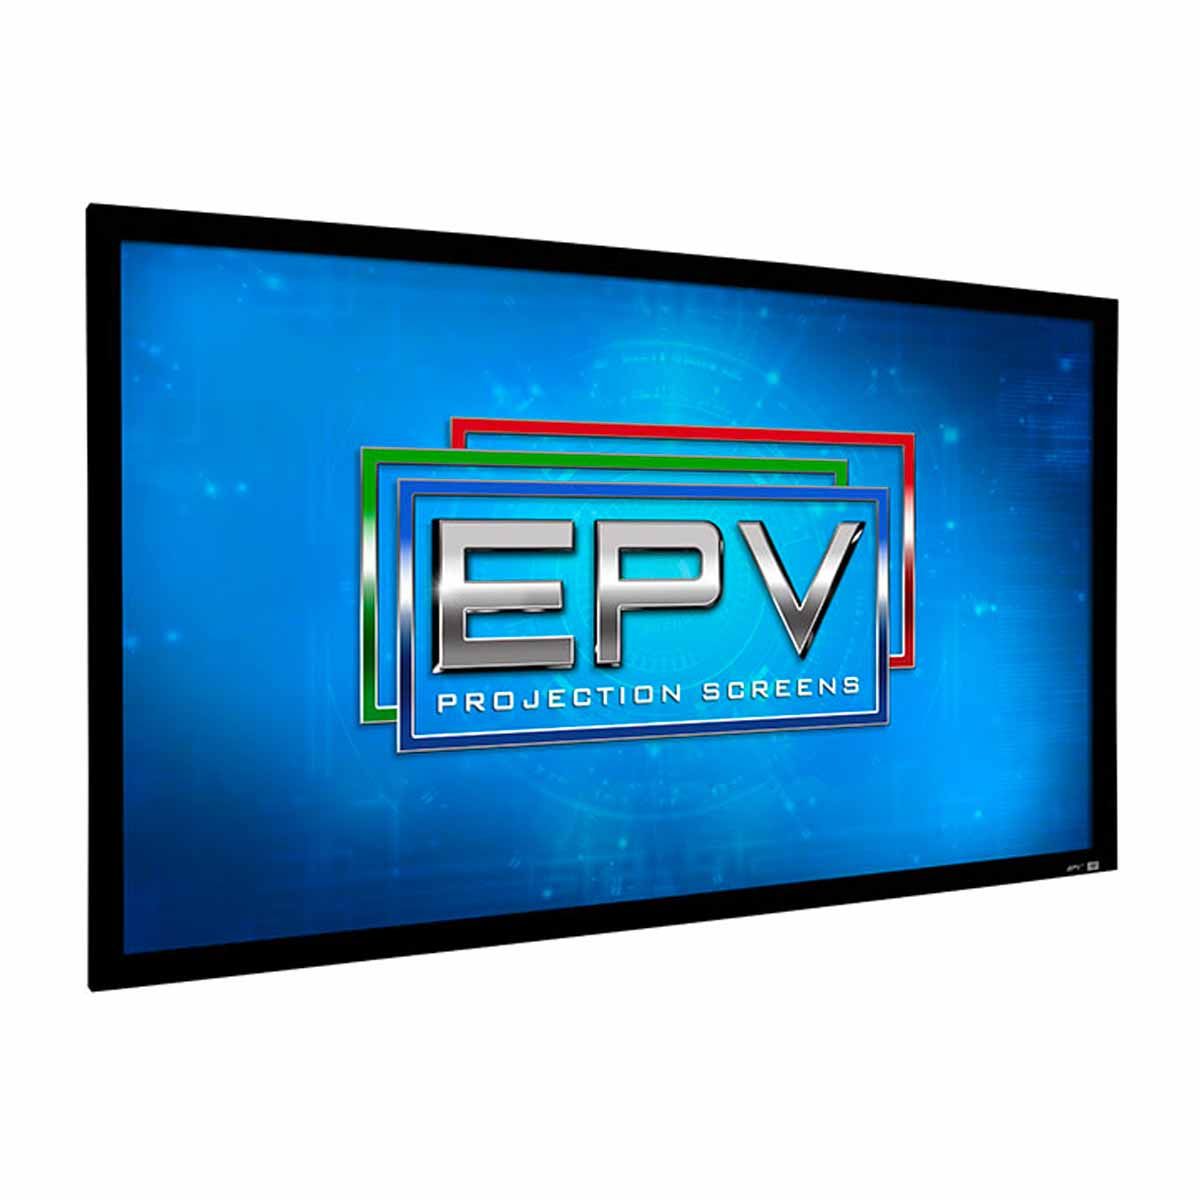 EPV Prime Vision ISF 3 Projector Screen angled front view with image of EPV logo